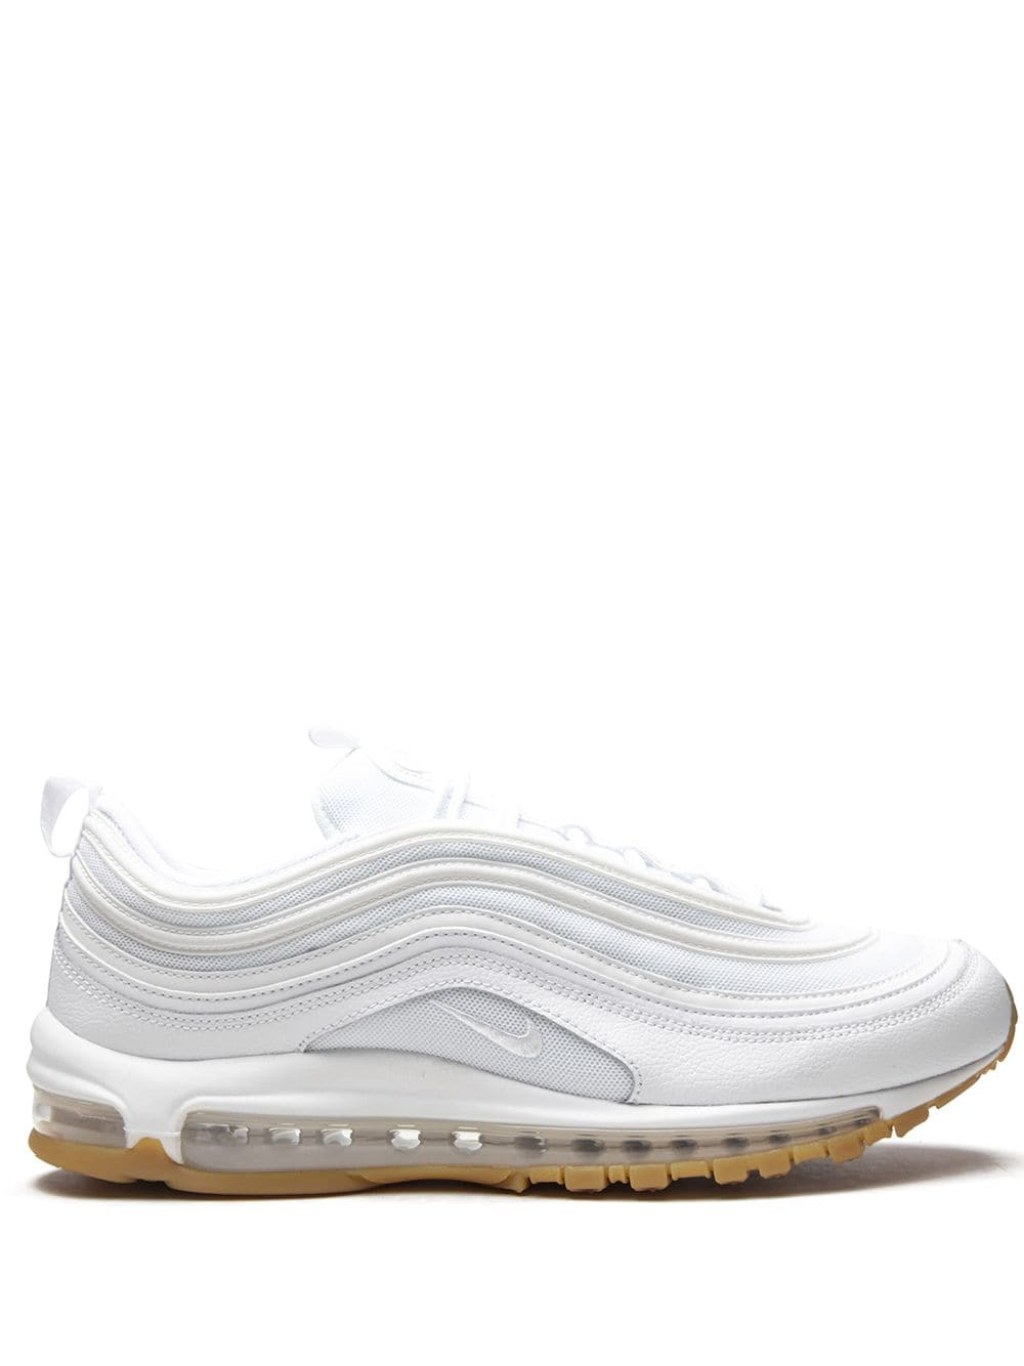 Picture of: Air Max  White / Gum Sneakers